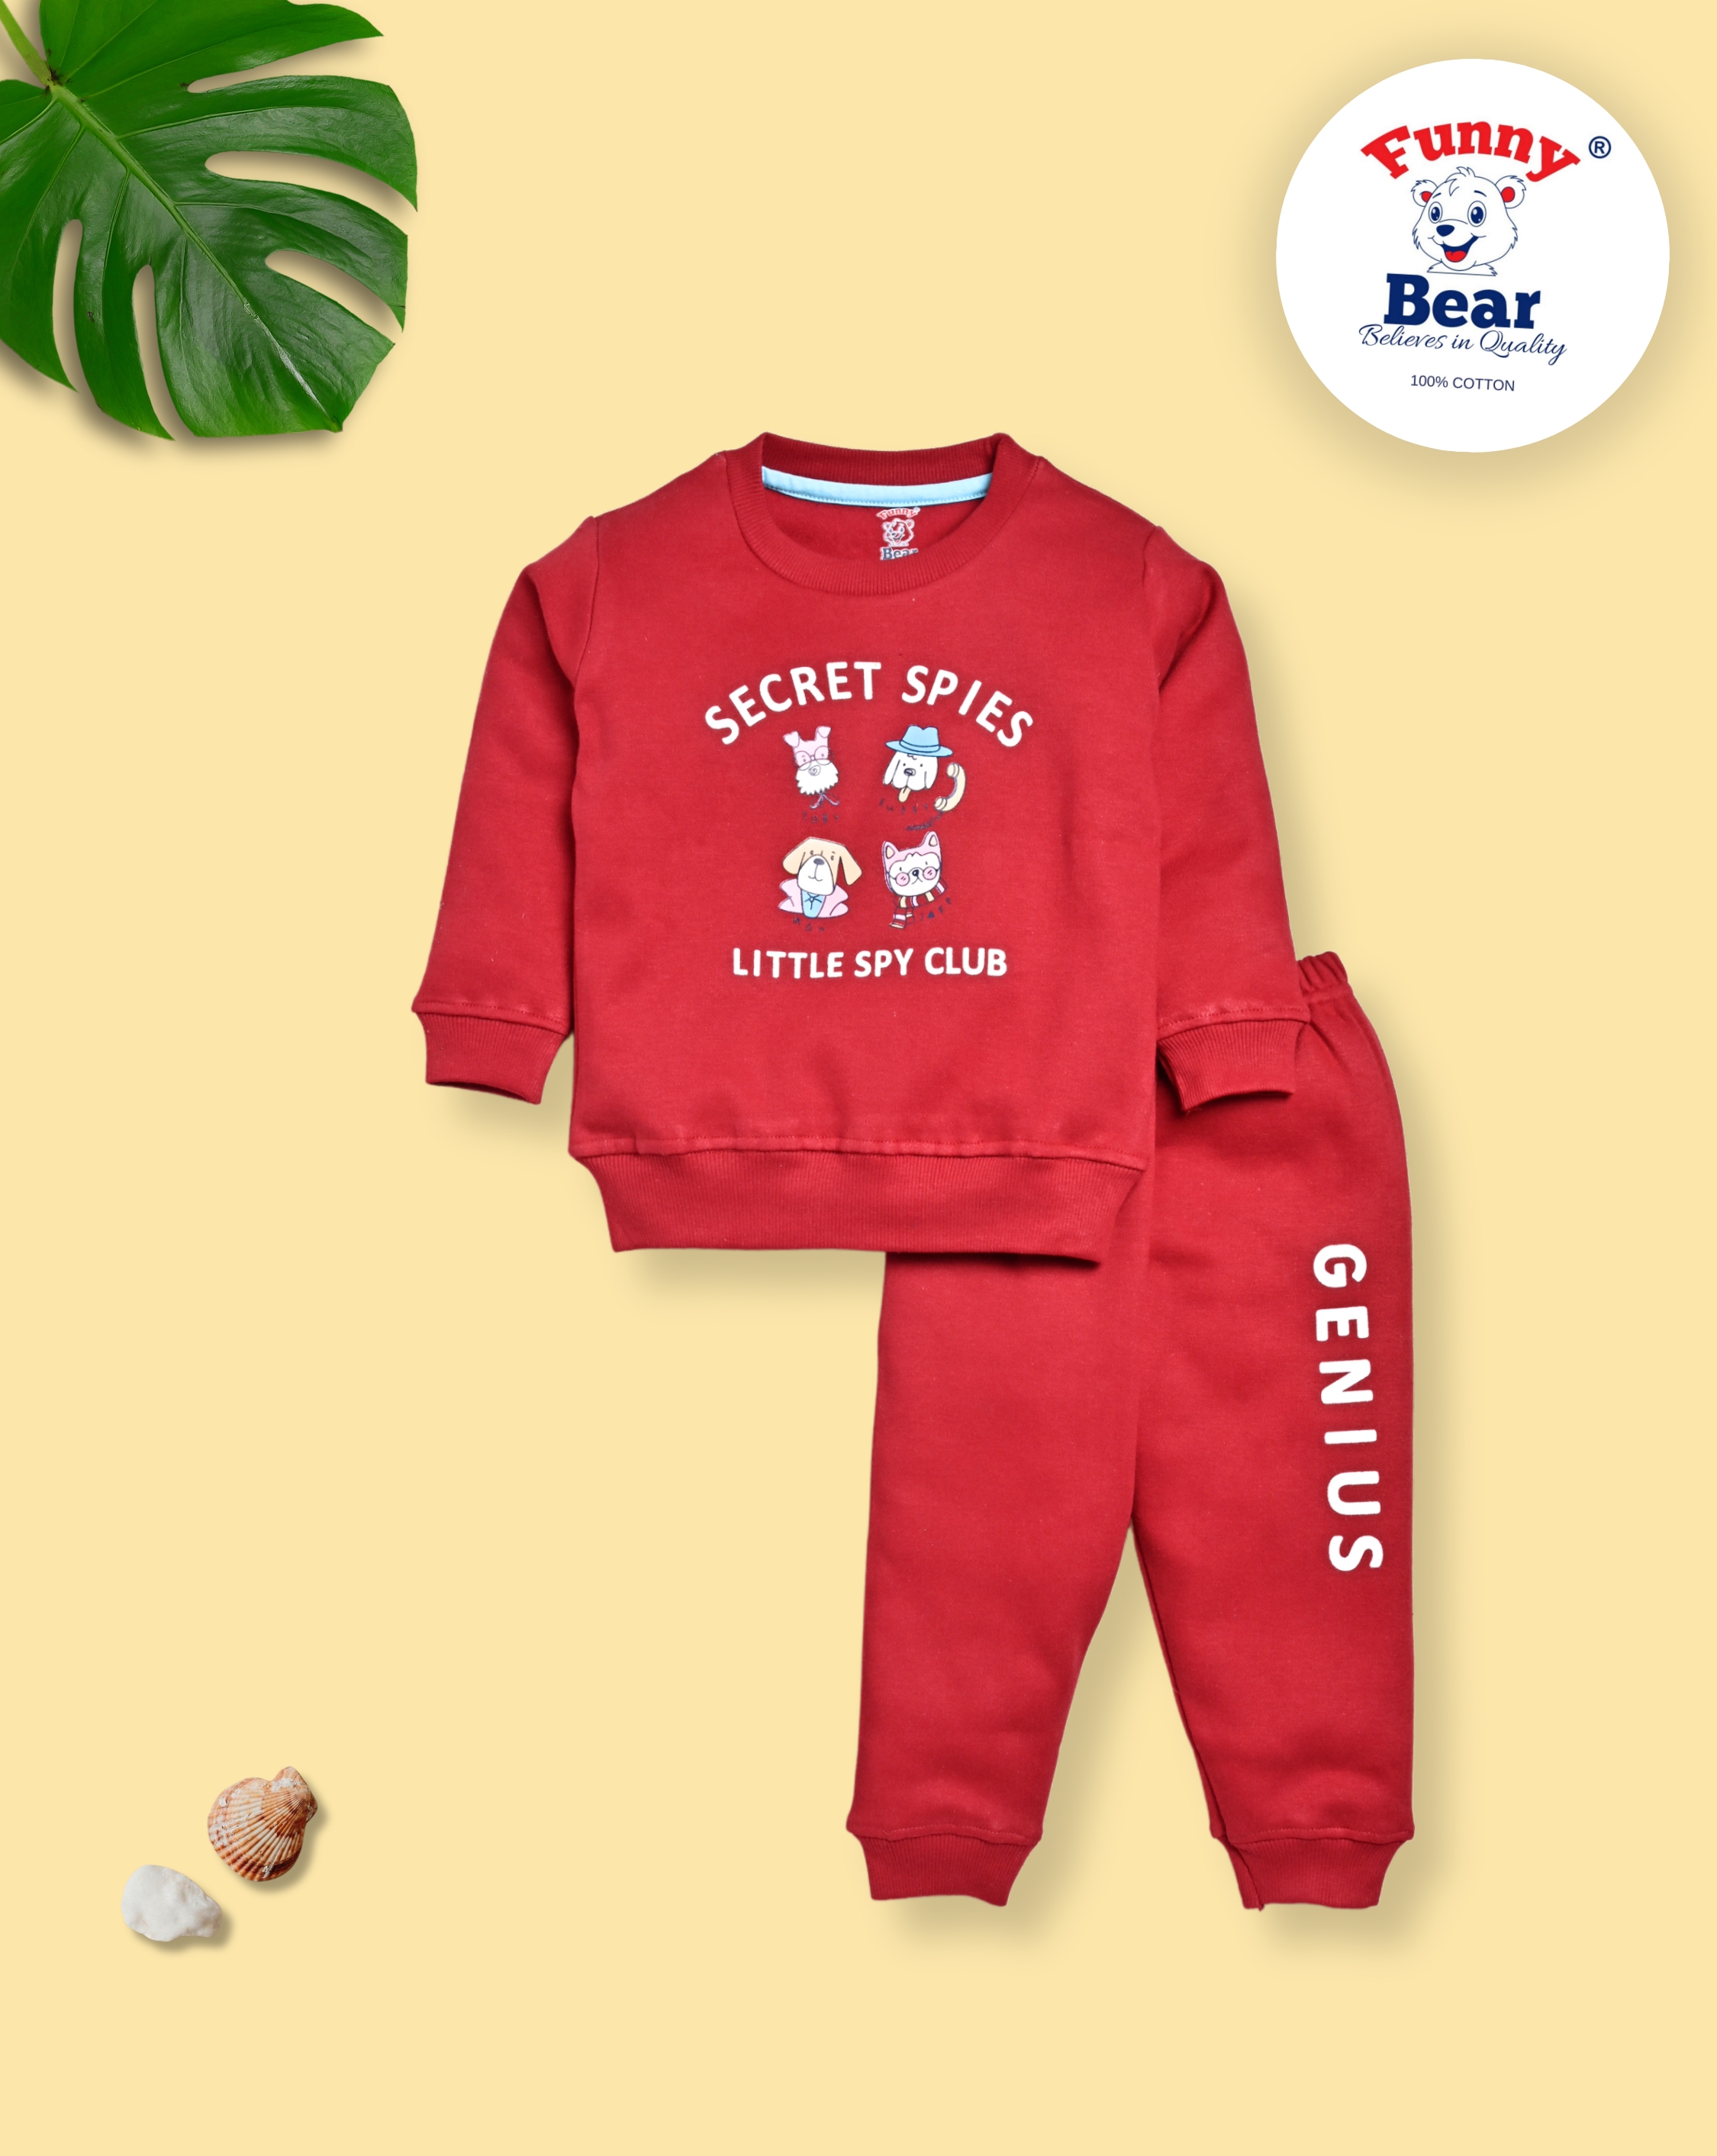 Funny Bear - Baby Clothes, Kids Clothes, Kids Wear Manufacturer in India image